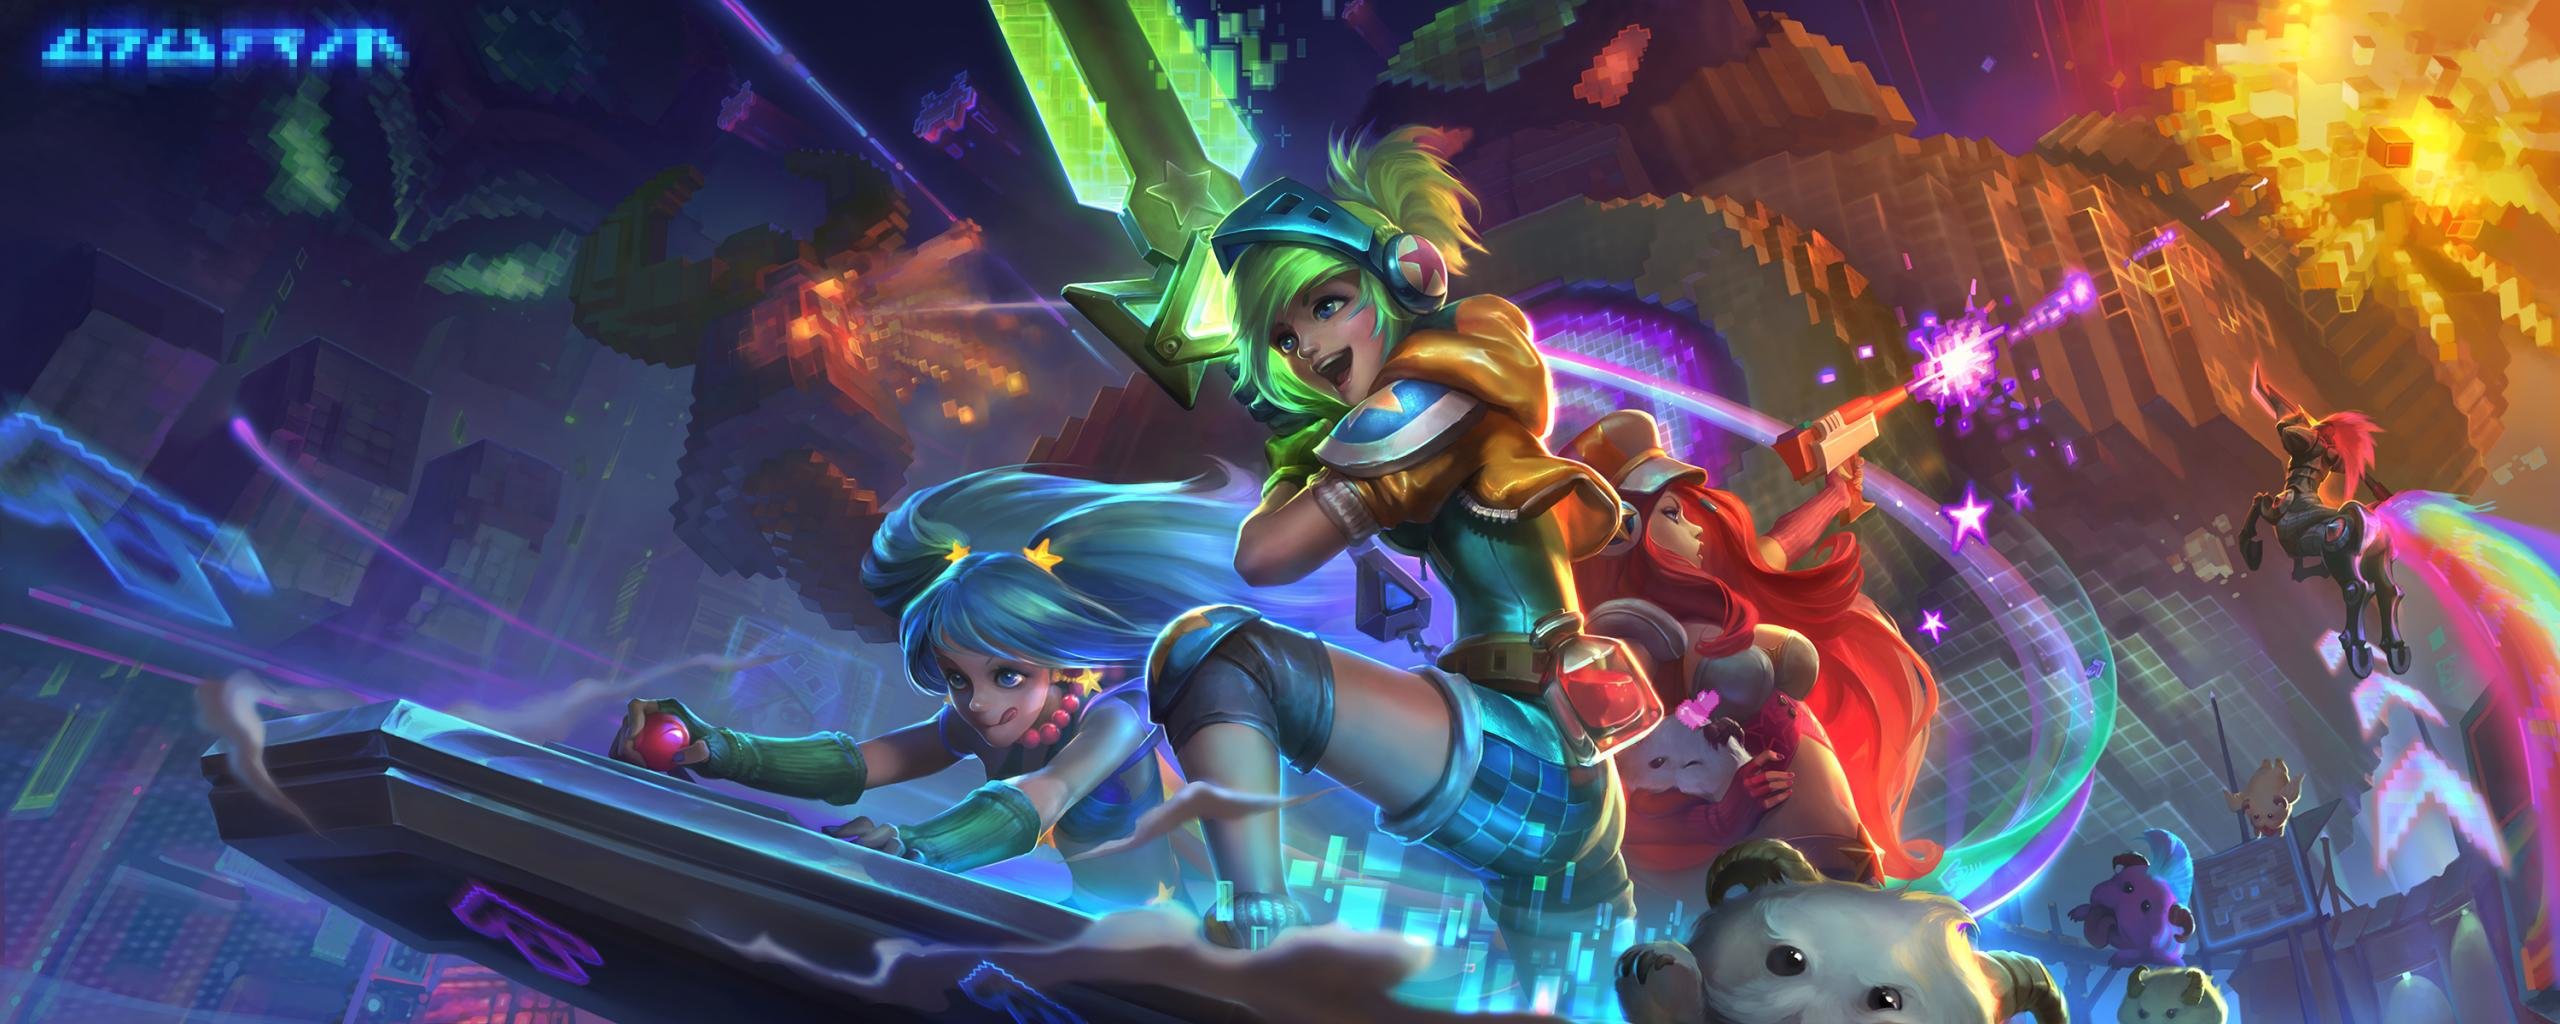 Free Download League Of Legends Background Id - League Of Legends Arcade Skins - HD Wallpaper 